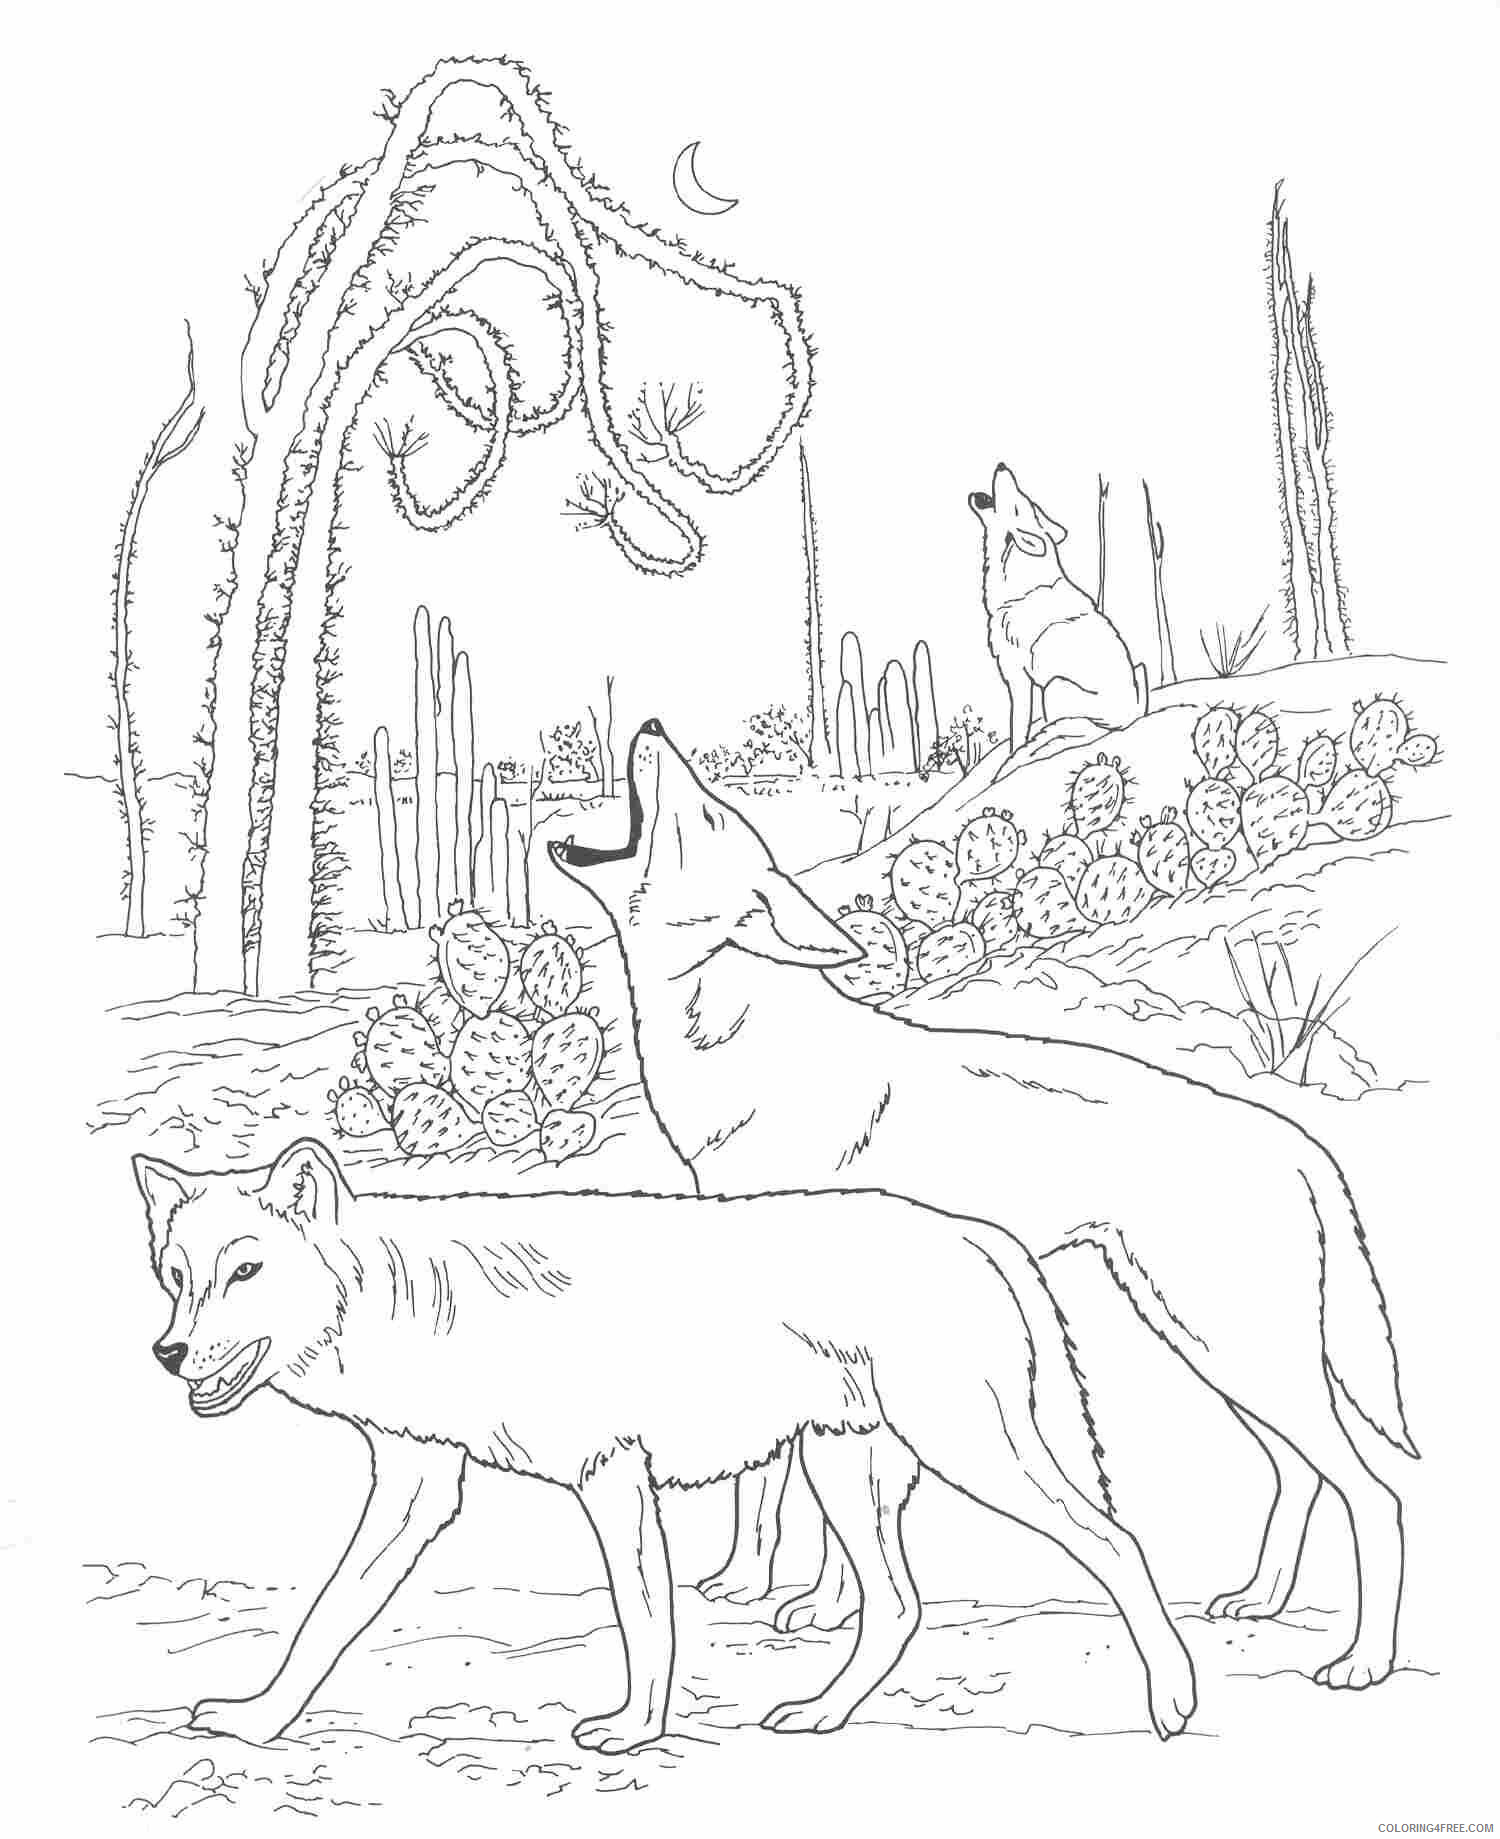 Coyote Coloring Pages Animal Printable Sheets Coyote Animal 2021 1216 Coloring4free